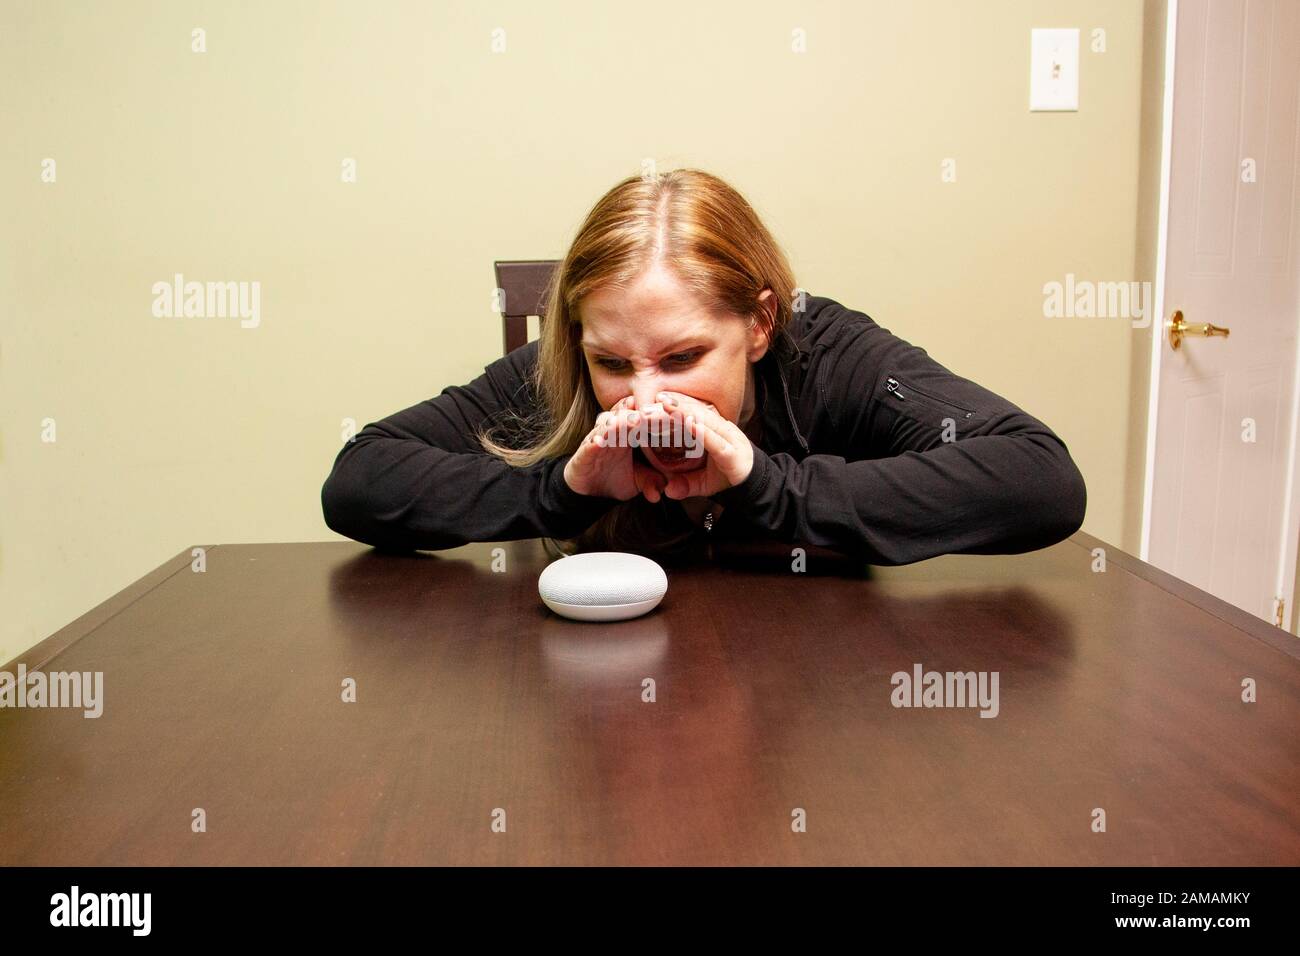 woman yelling at her home assist device because it is not working Stock Photo